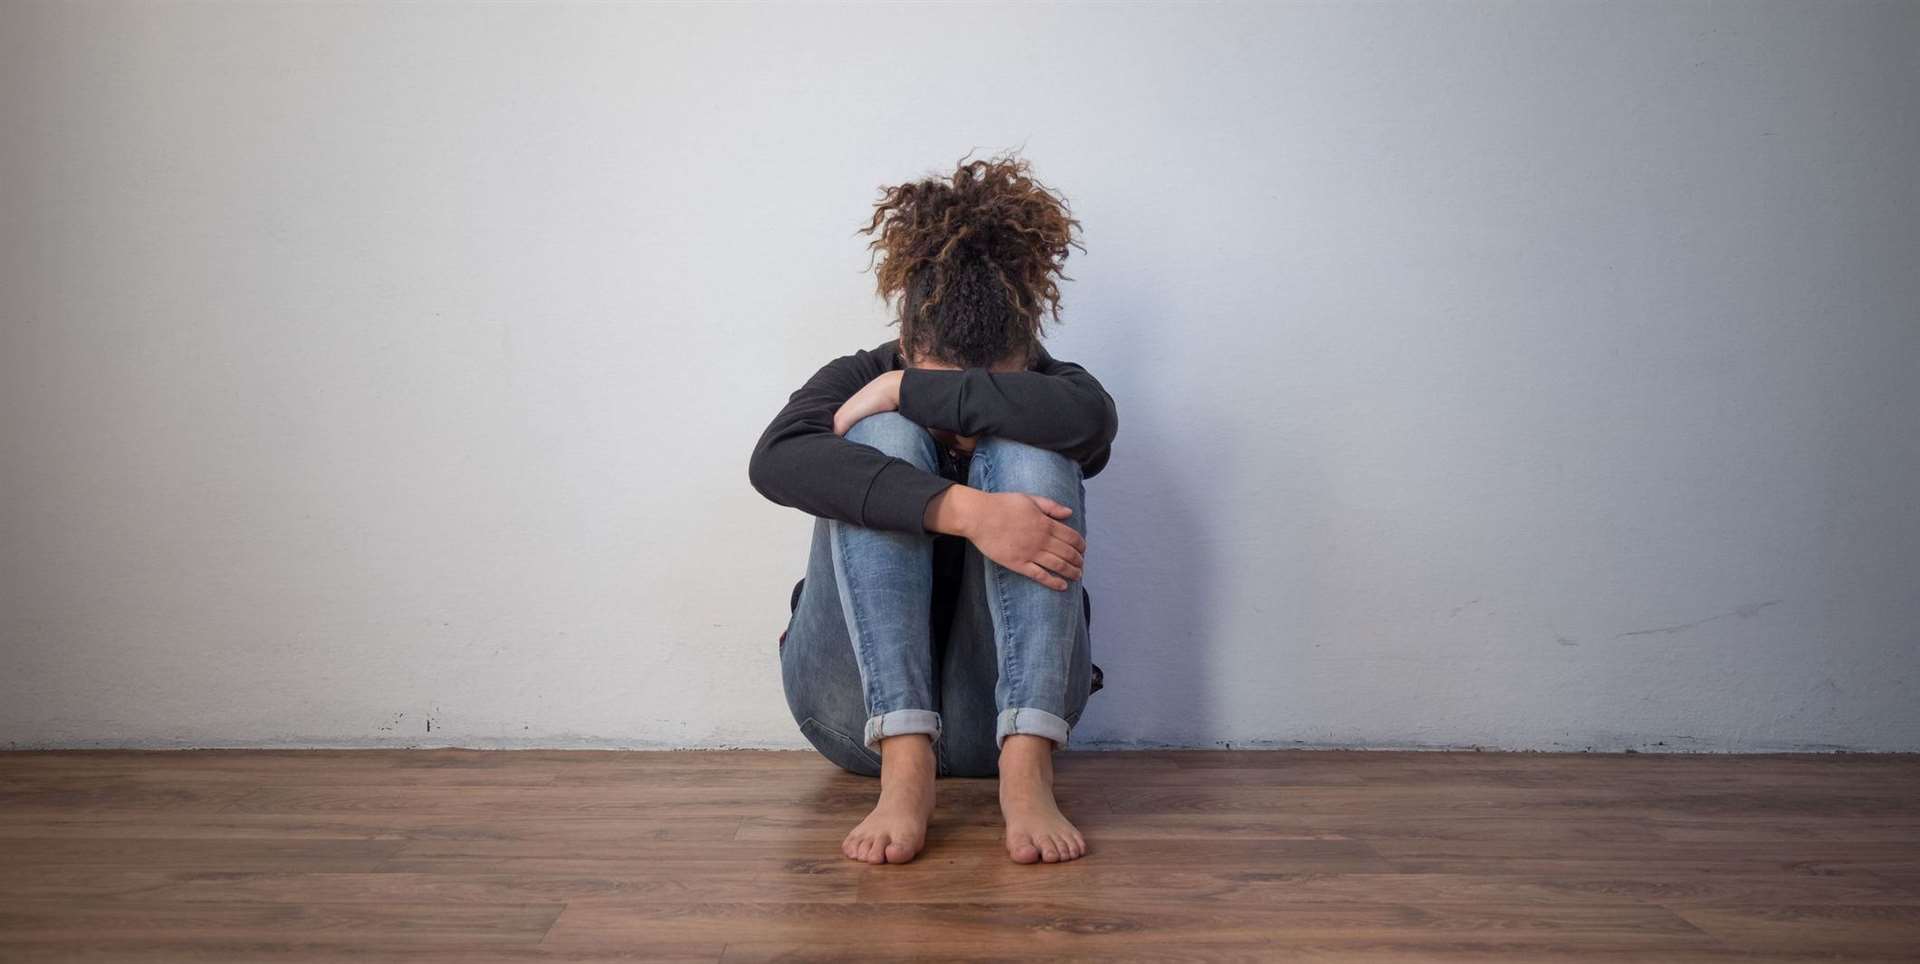 Teenagers and young adults are also feeling lonely. The Office for National Statistics has reported that 11% of 10 to 15-year-olds say they often feel lonely.